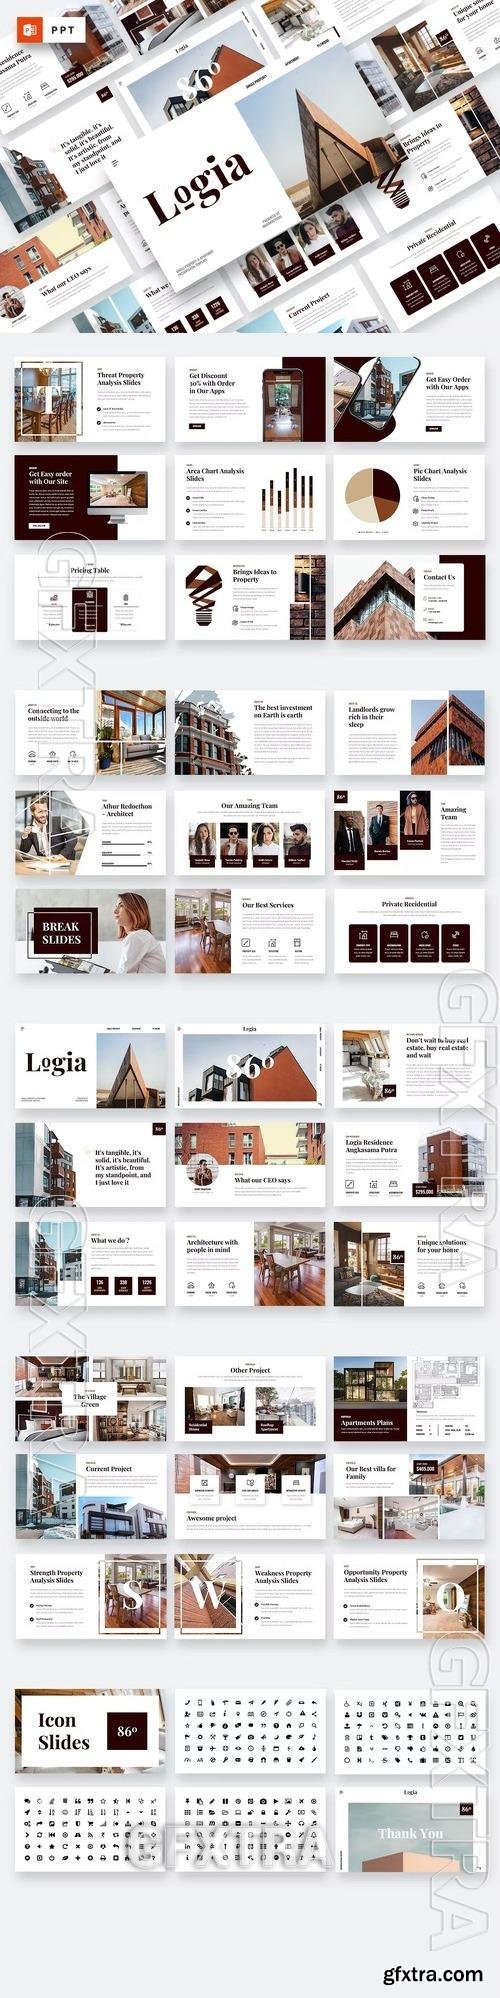 Logia - Single Property Powerpoint Template Q2PLUW3